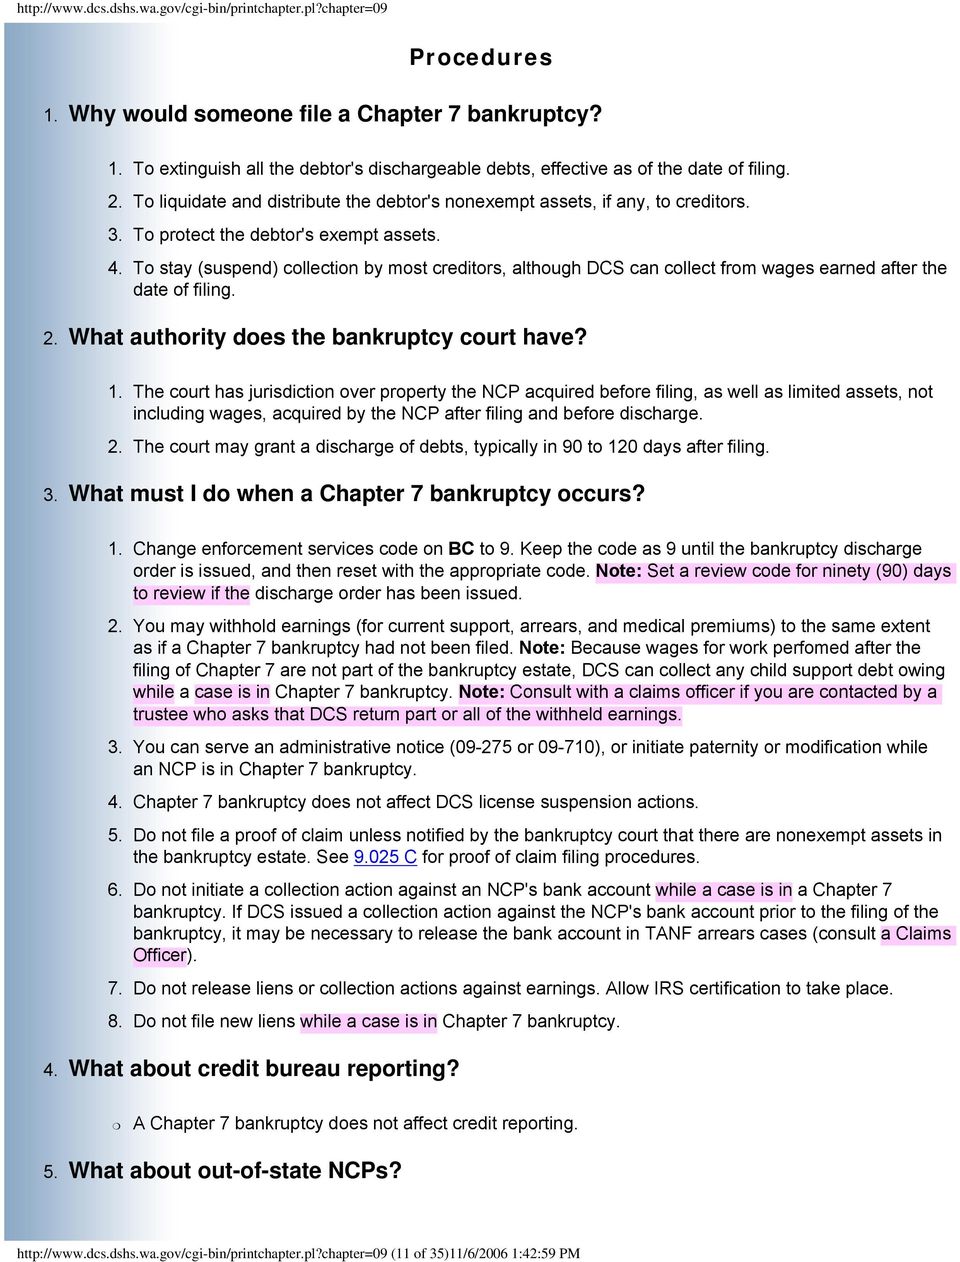 To stay (suspend) collection by most creditors, although DCS can collect from wages earned after the date of filing. 2. What authority does the bankruptcy court have? 1.